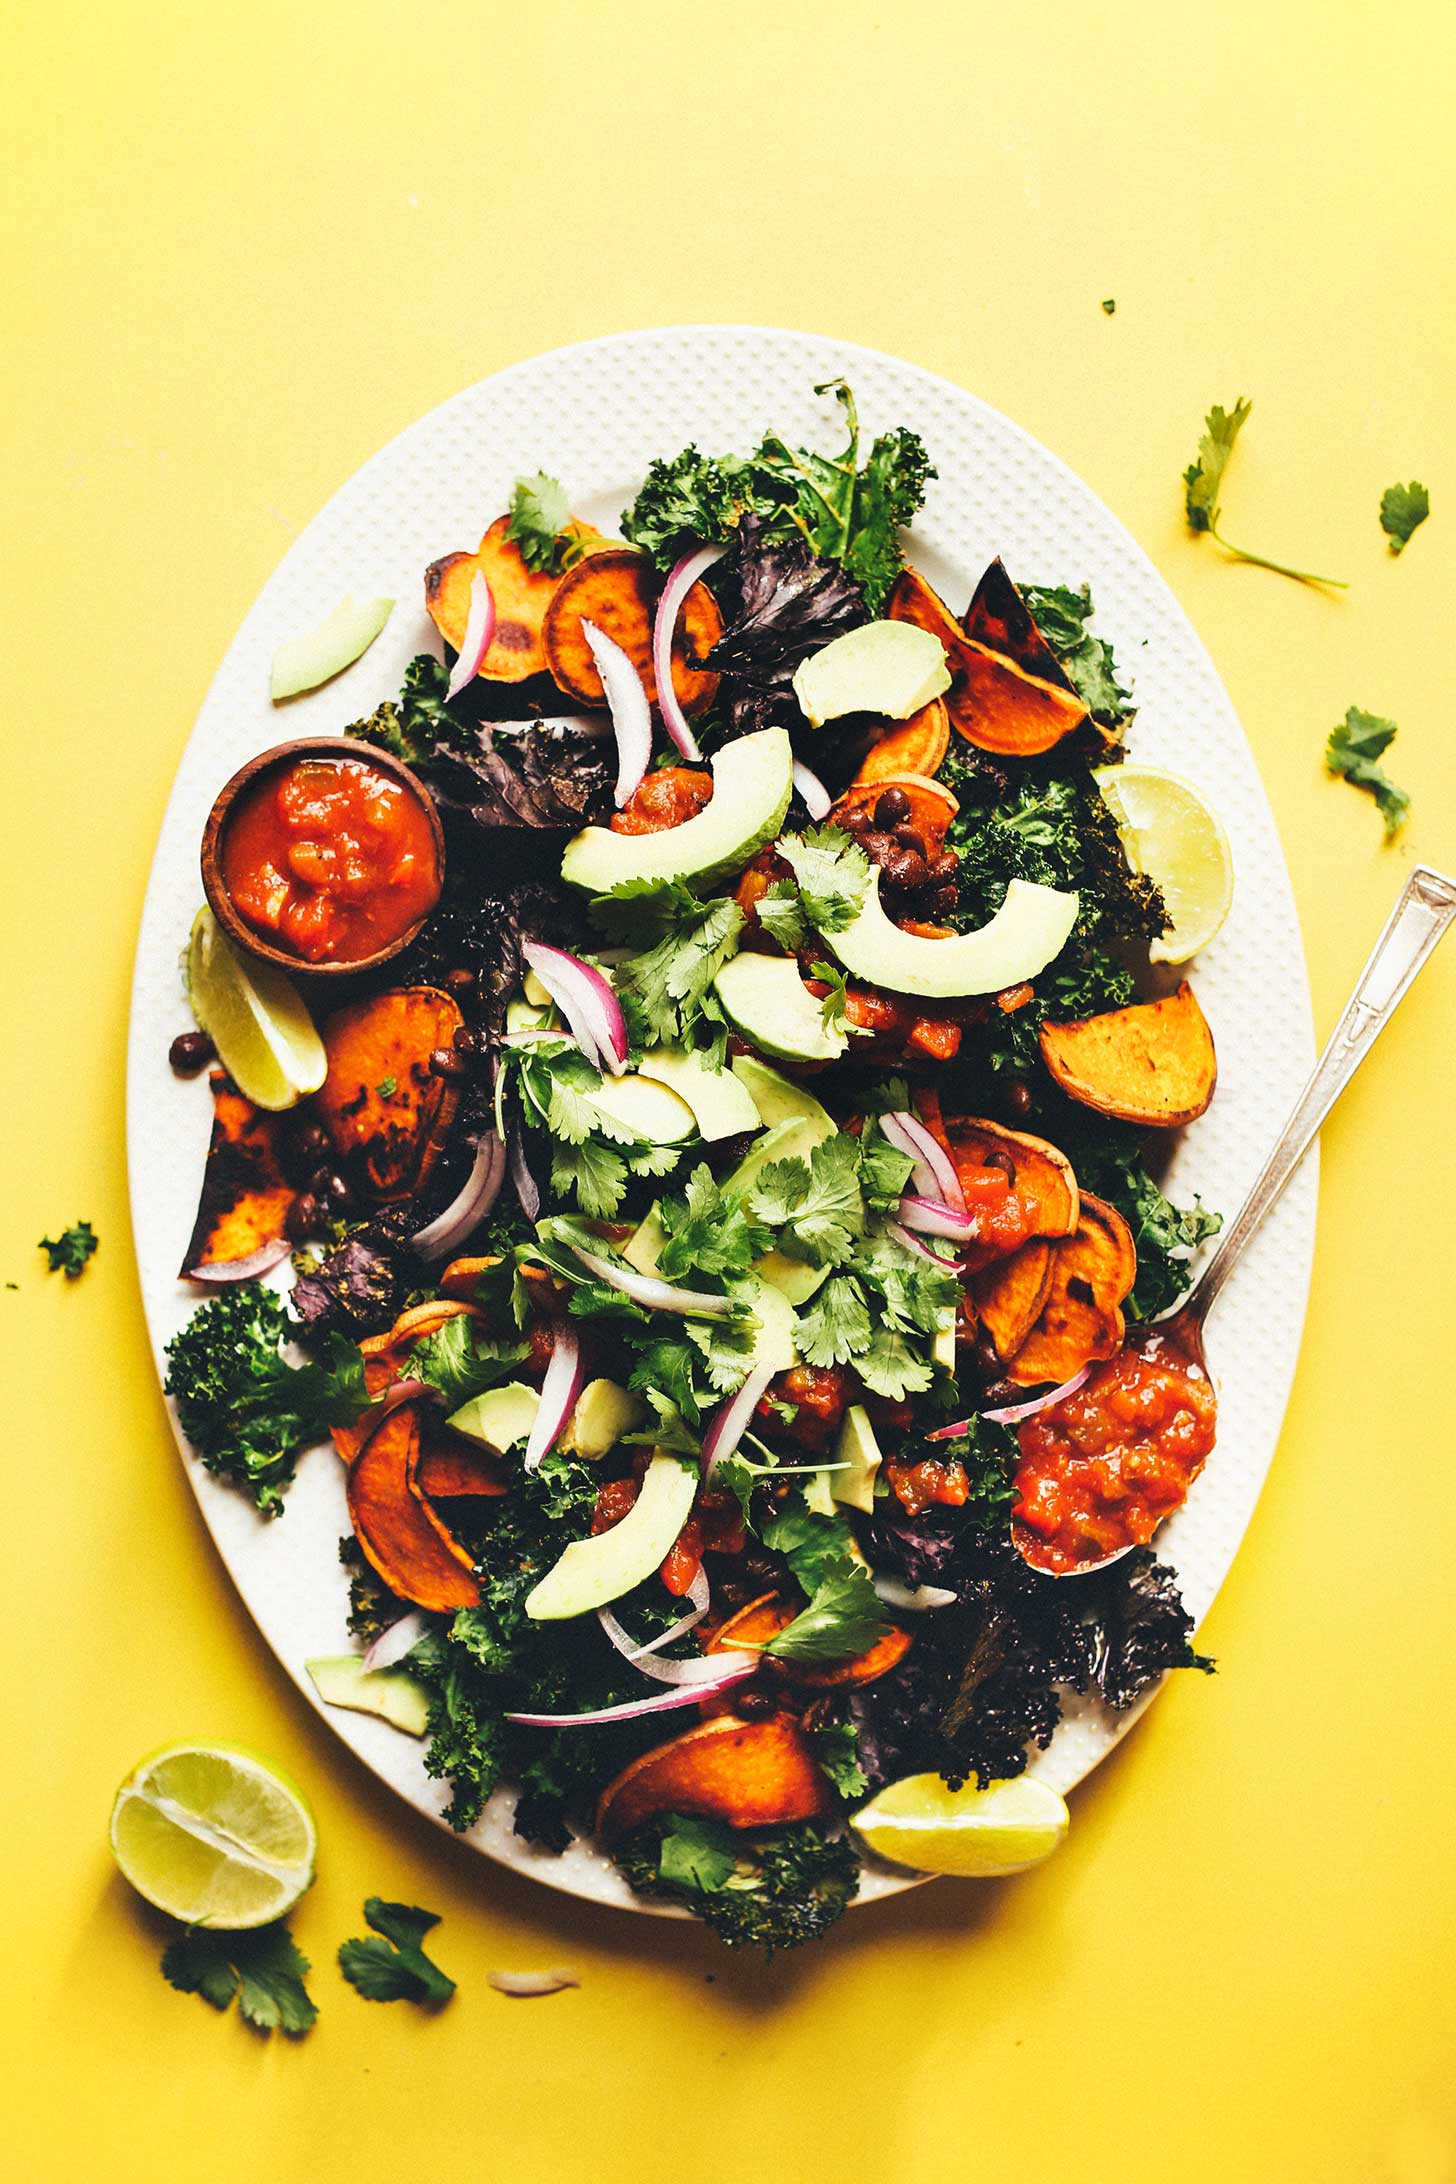 Ceramic platter filled with Kale Nachos with Black Beans, Sweet Potatoes, and Avocado